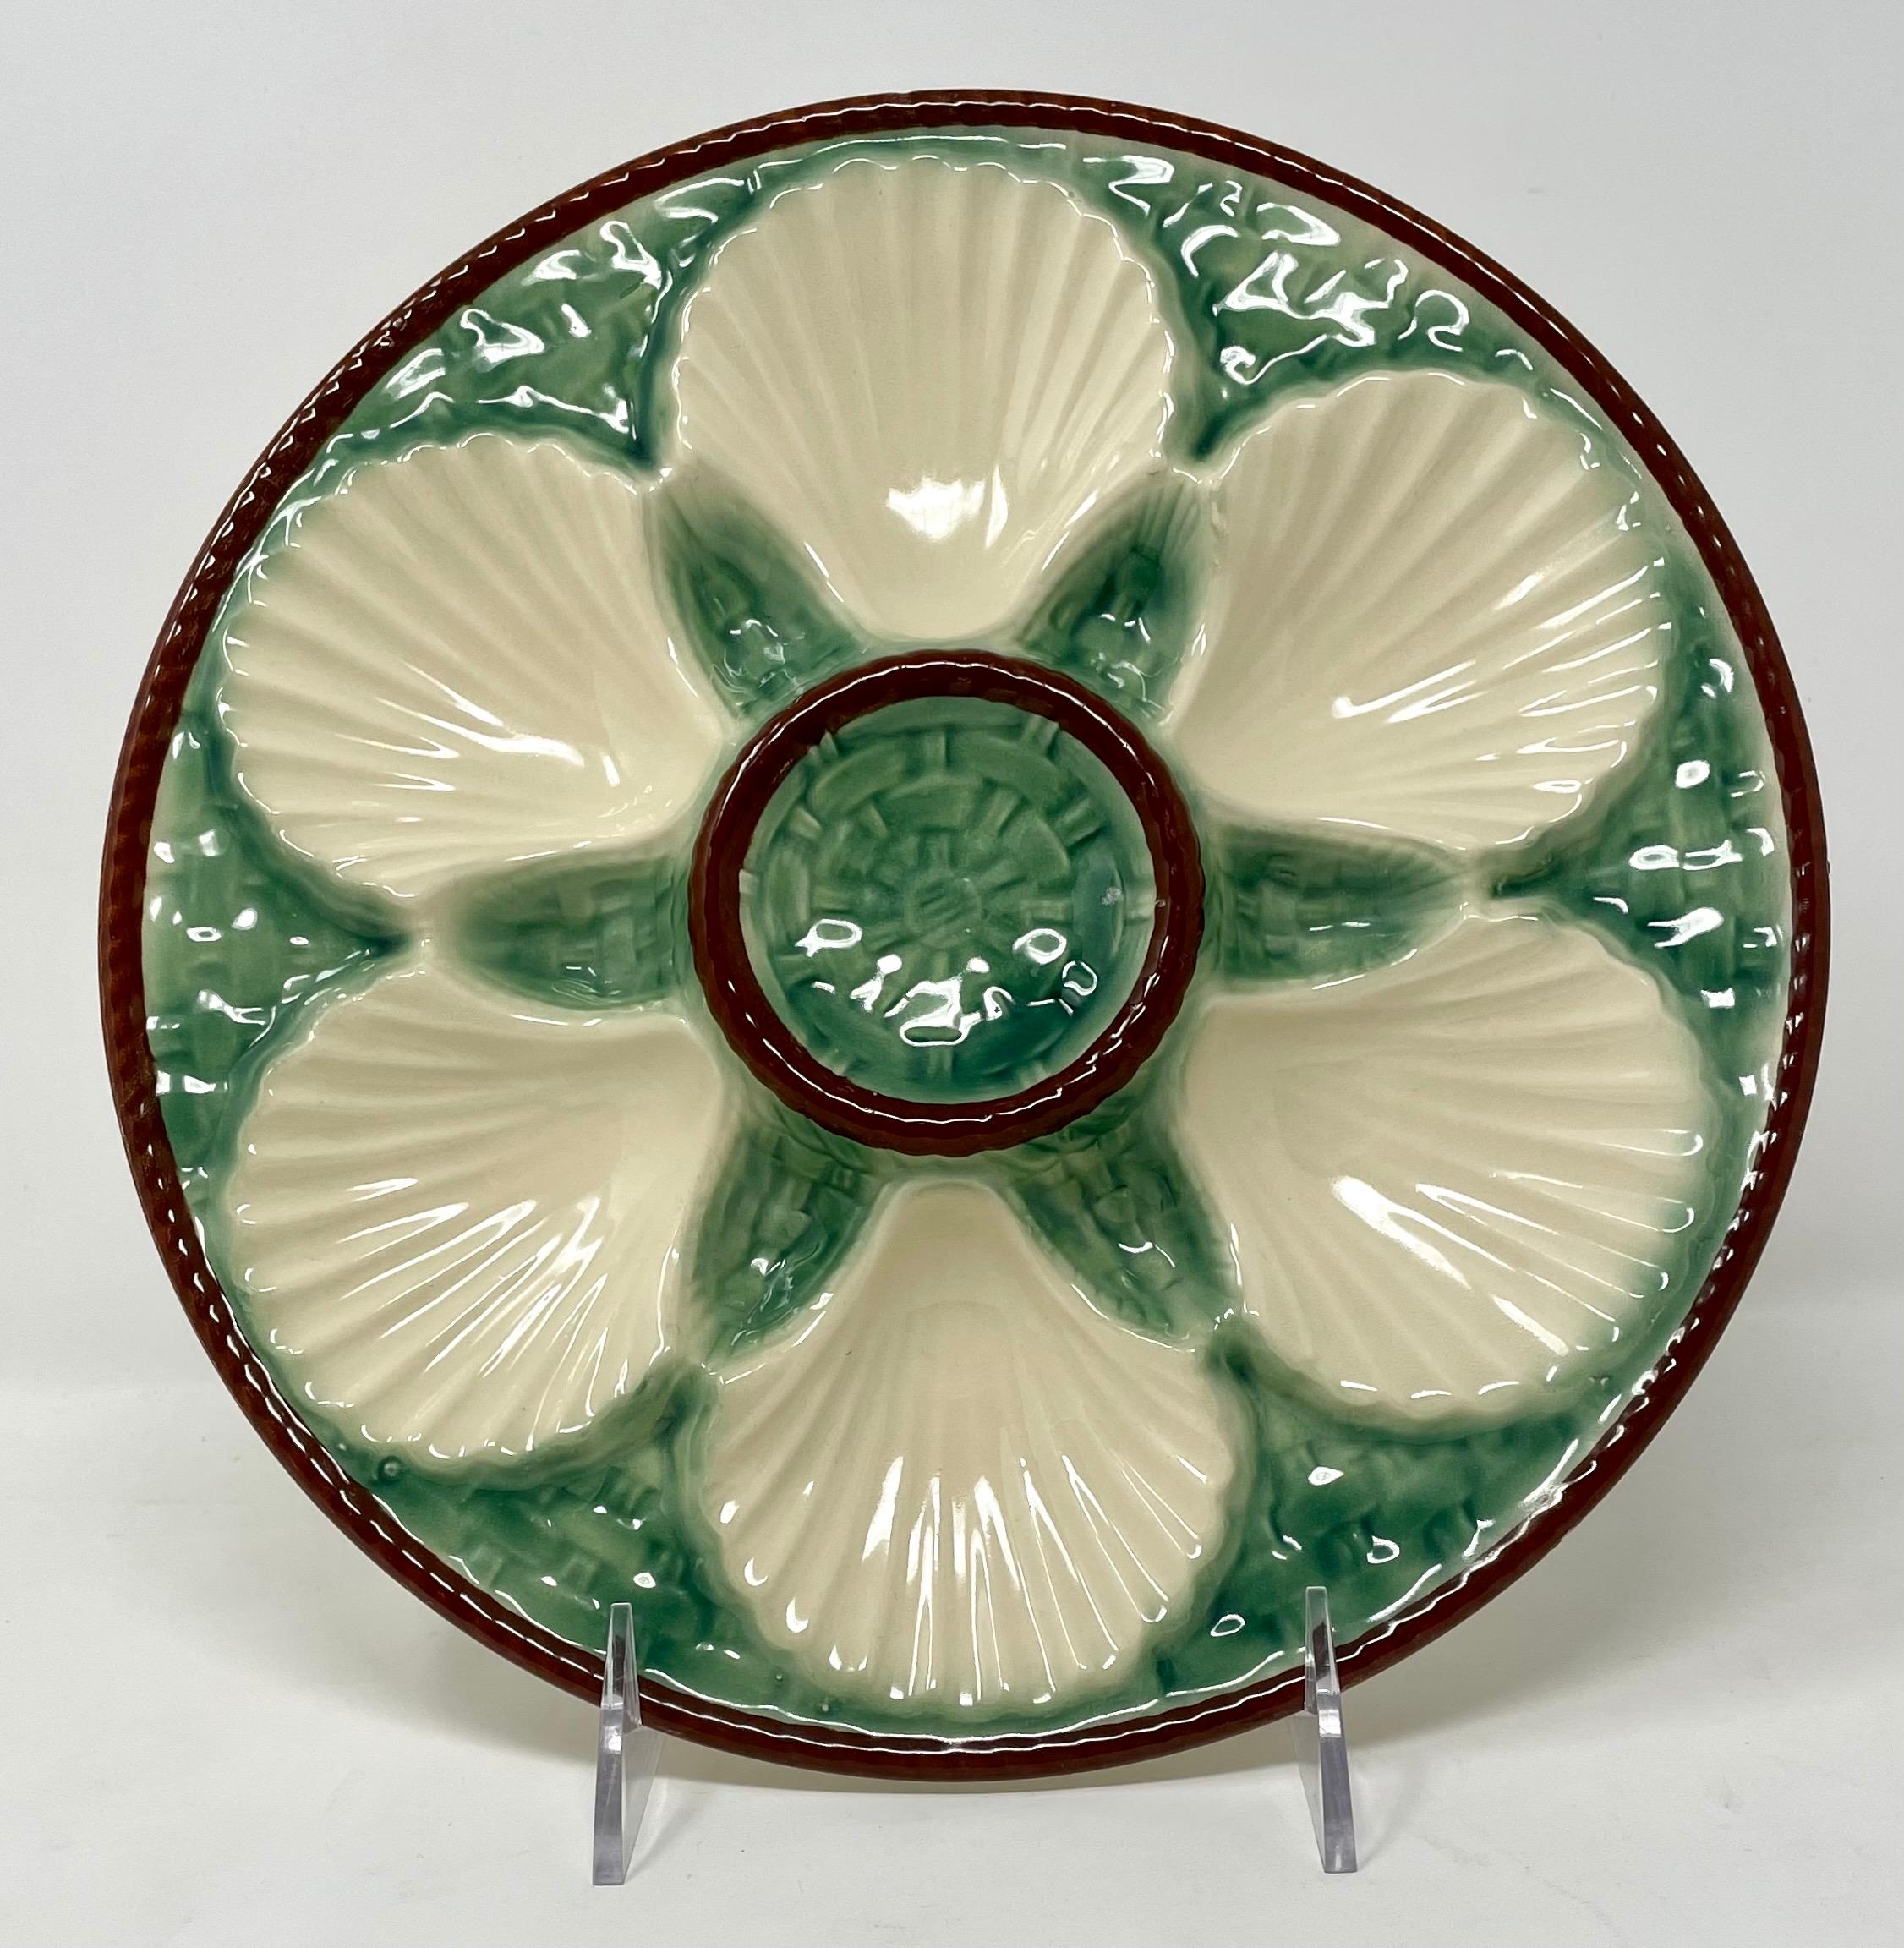 Estate French Faience pottery porcelain oyster plate by Longchamp, Circa 1930's.